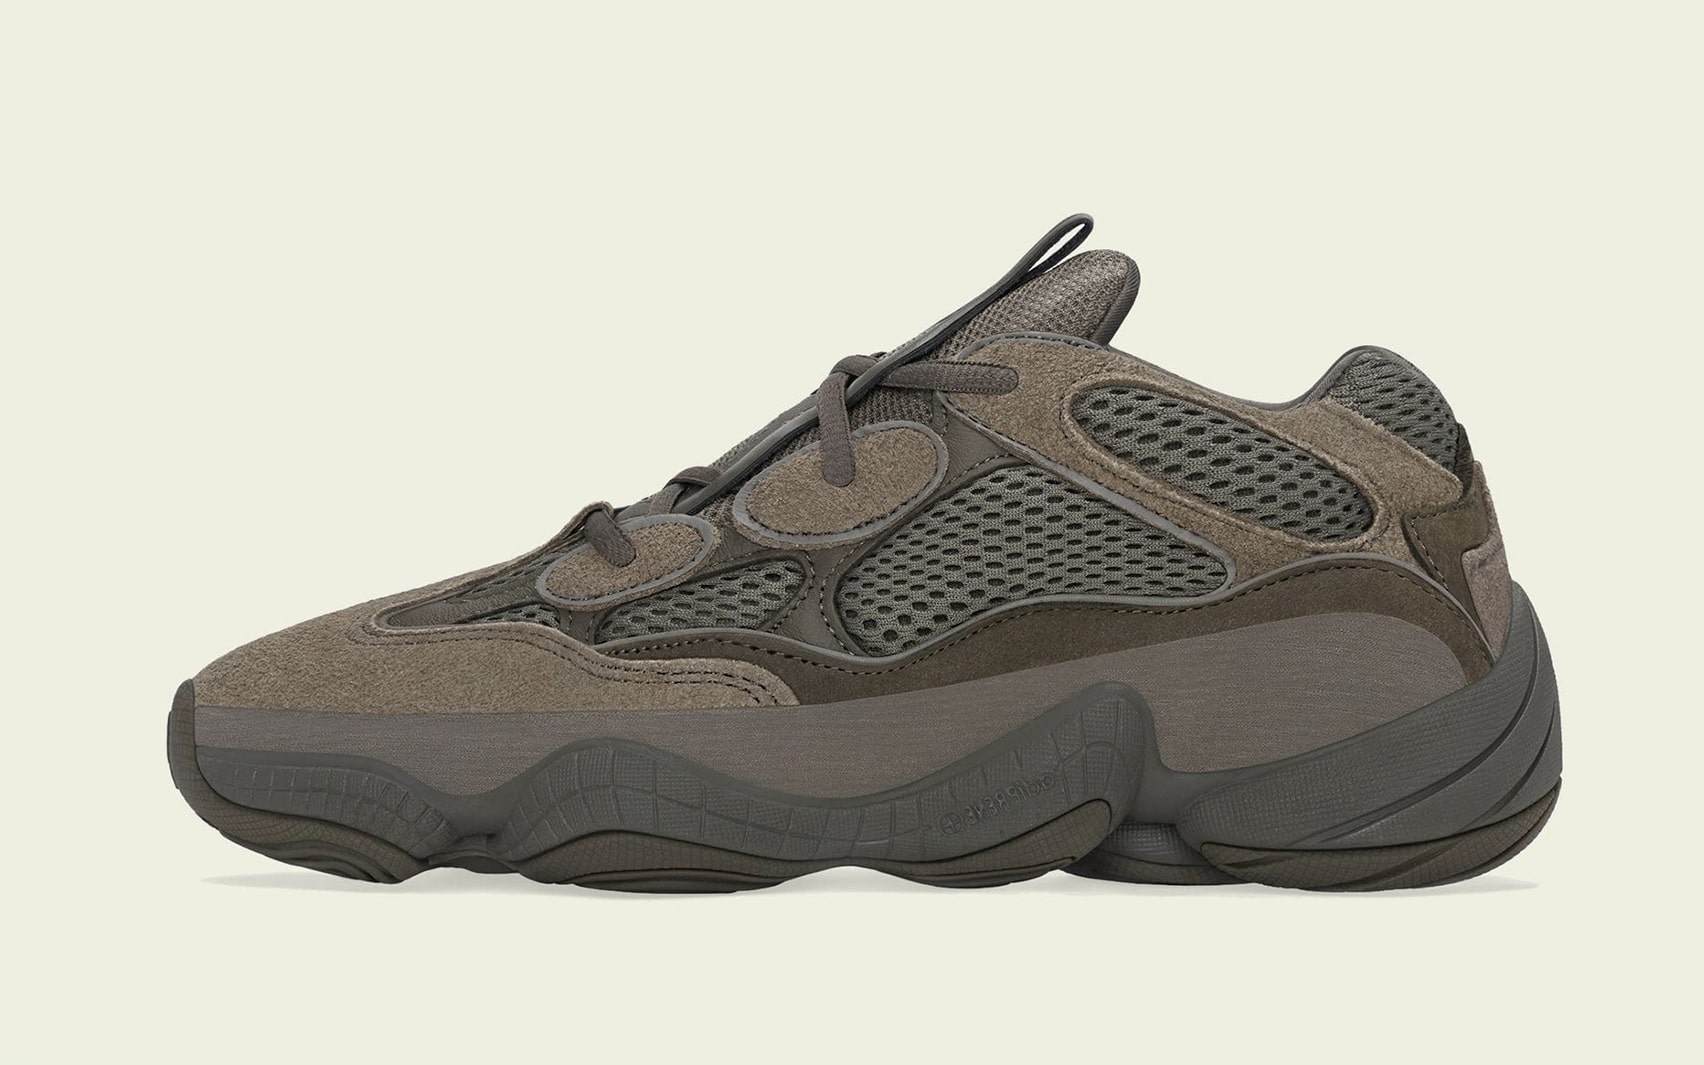 adidas-yeezy-500-brown-clay-GX3606-release-date-2